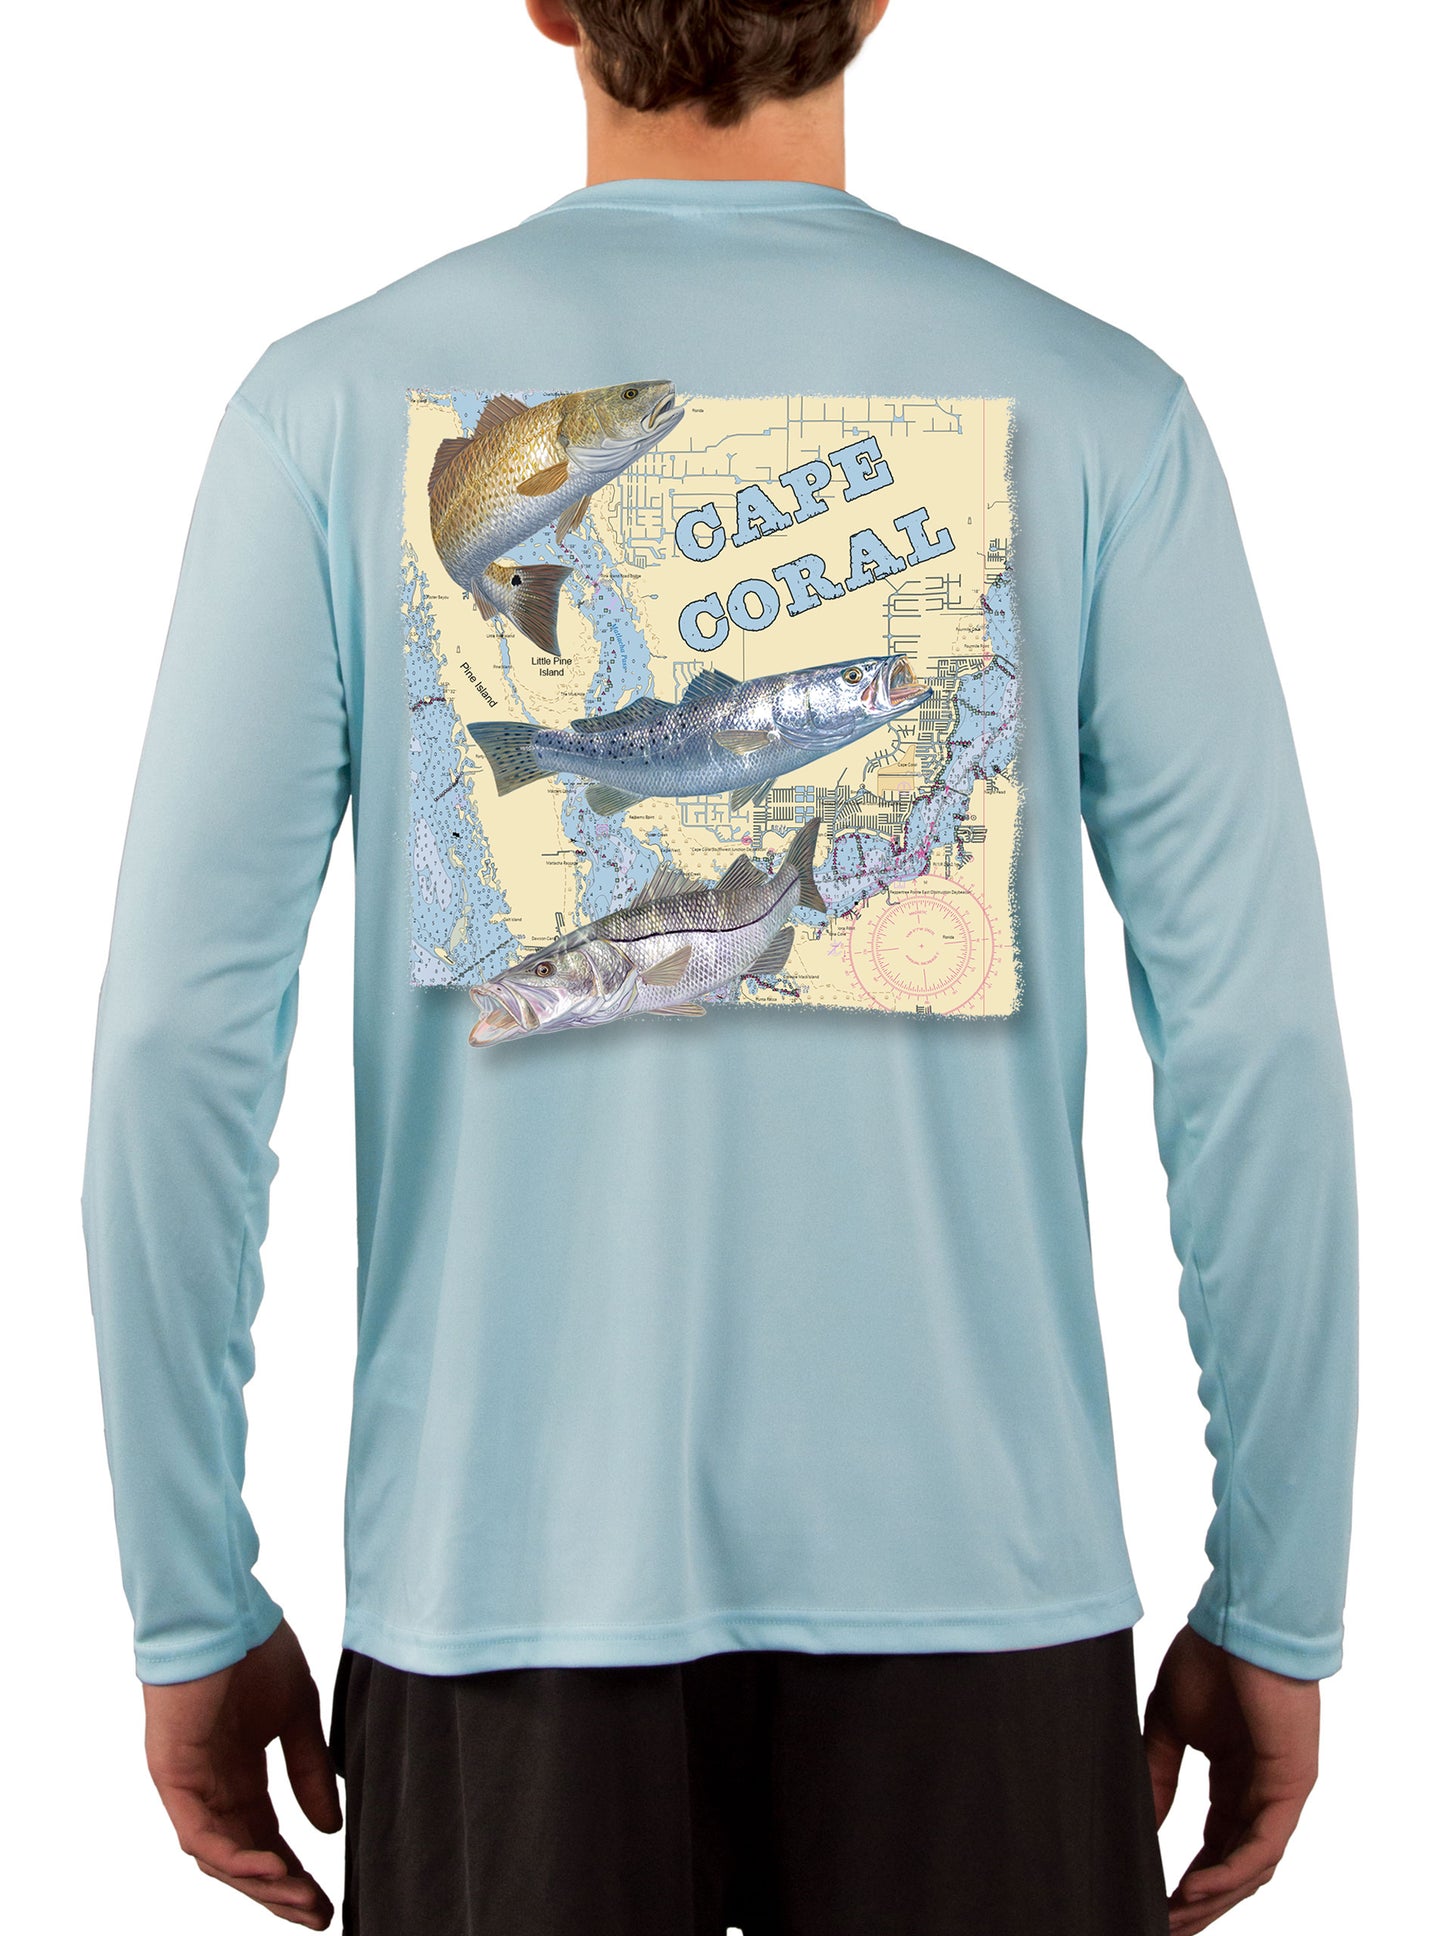 Cape Coral Florida Fishing Shirts For Men Redfish Speckled Sea